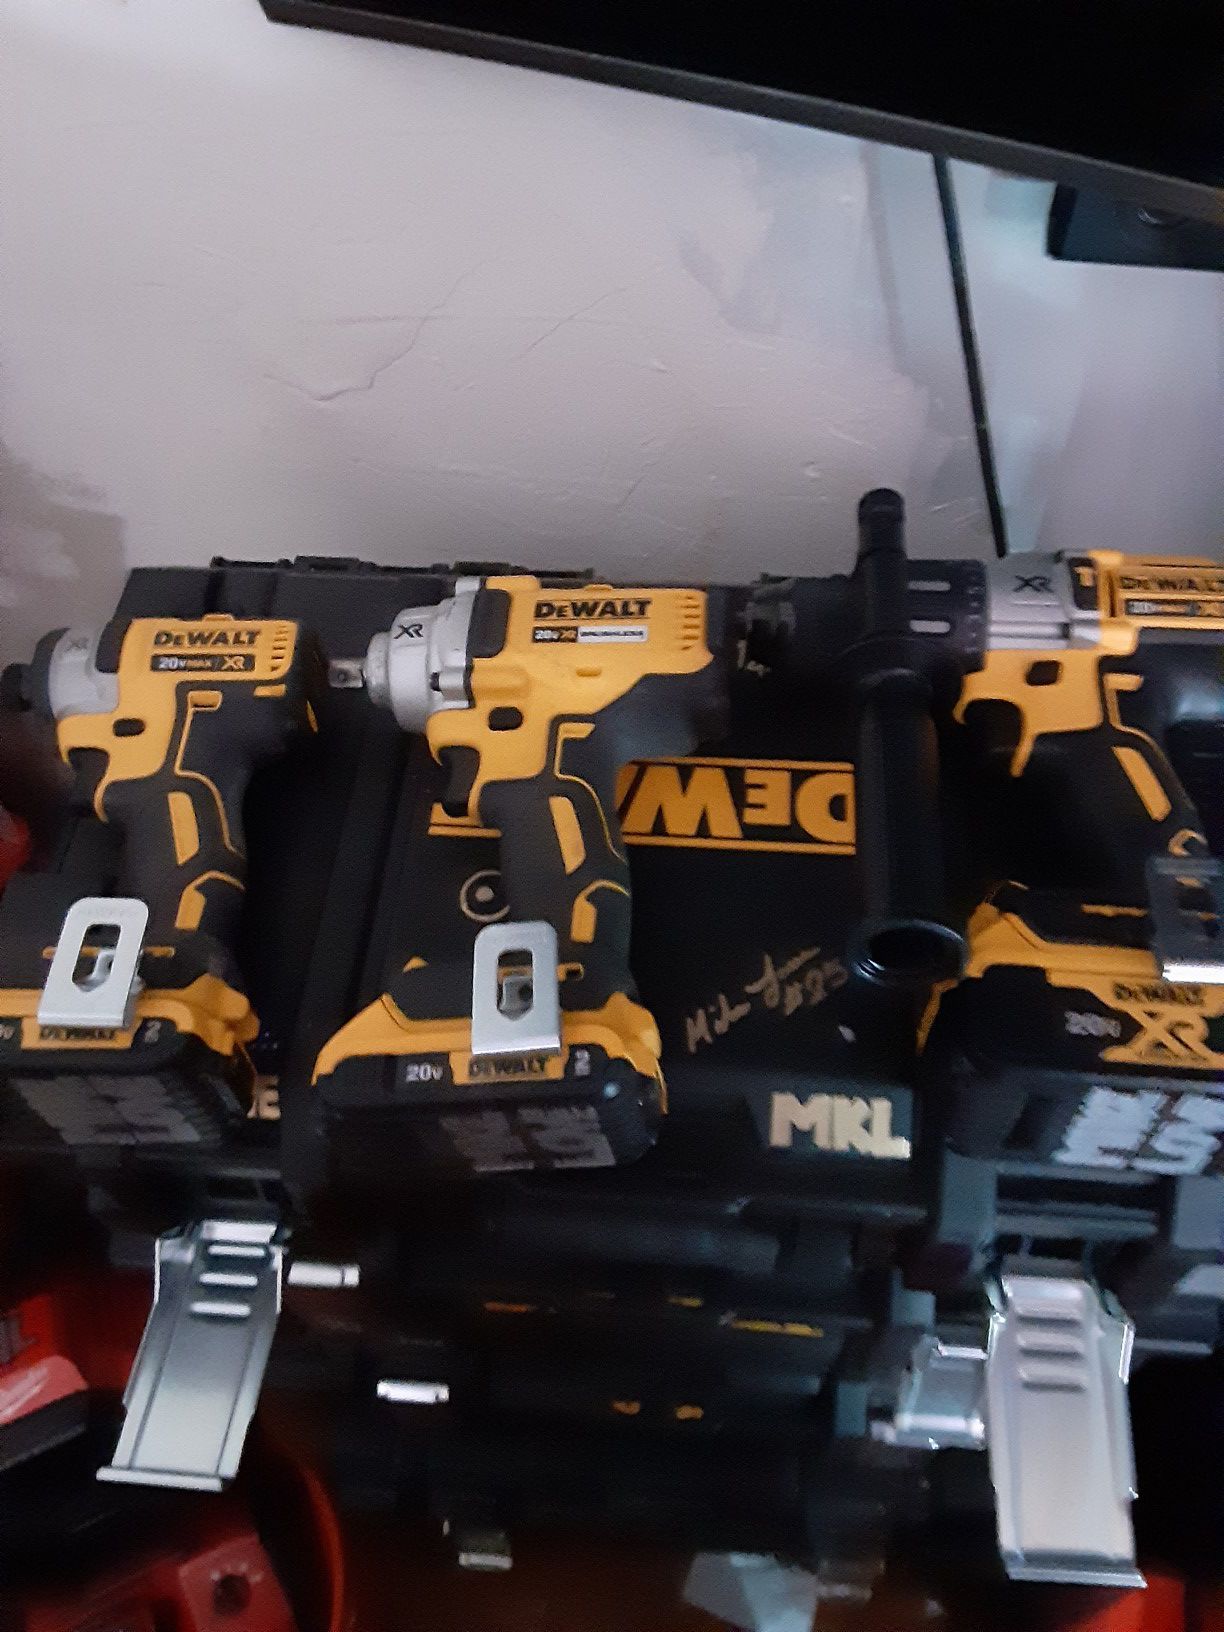 Dewalt drills all with batteries and fast charger and dewalt tool bag